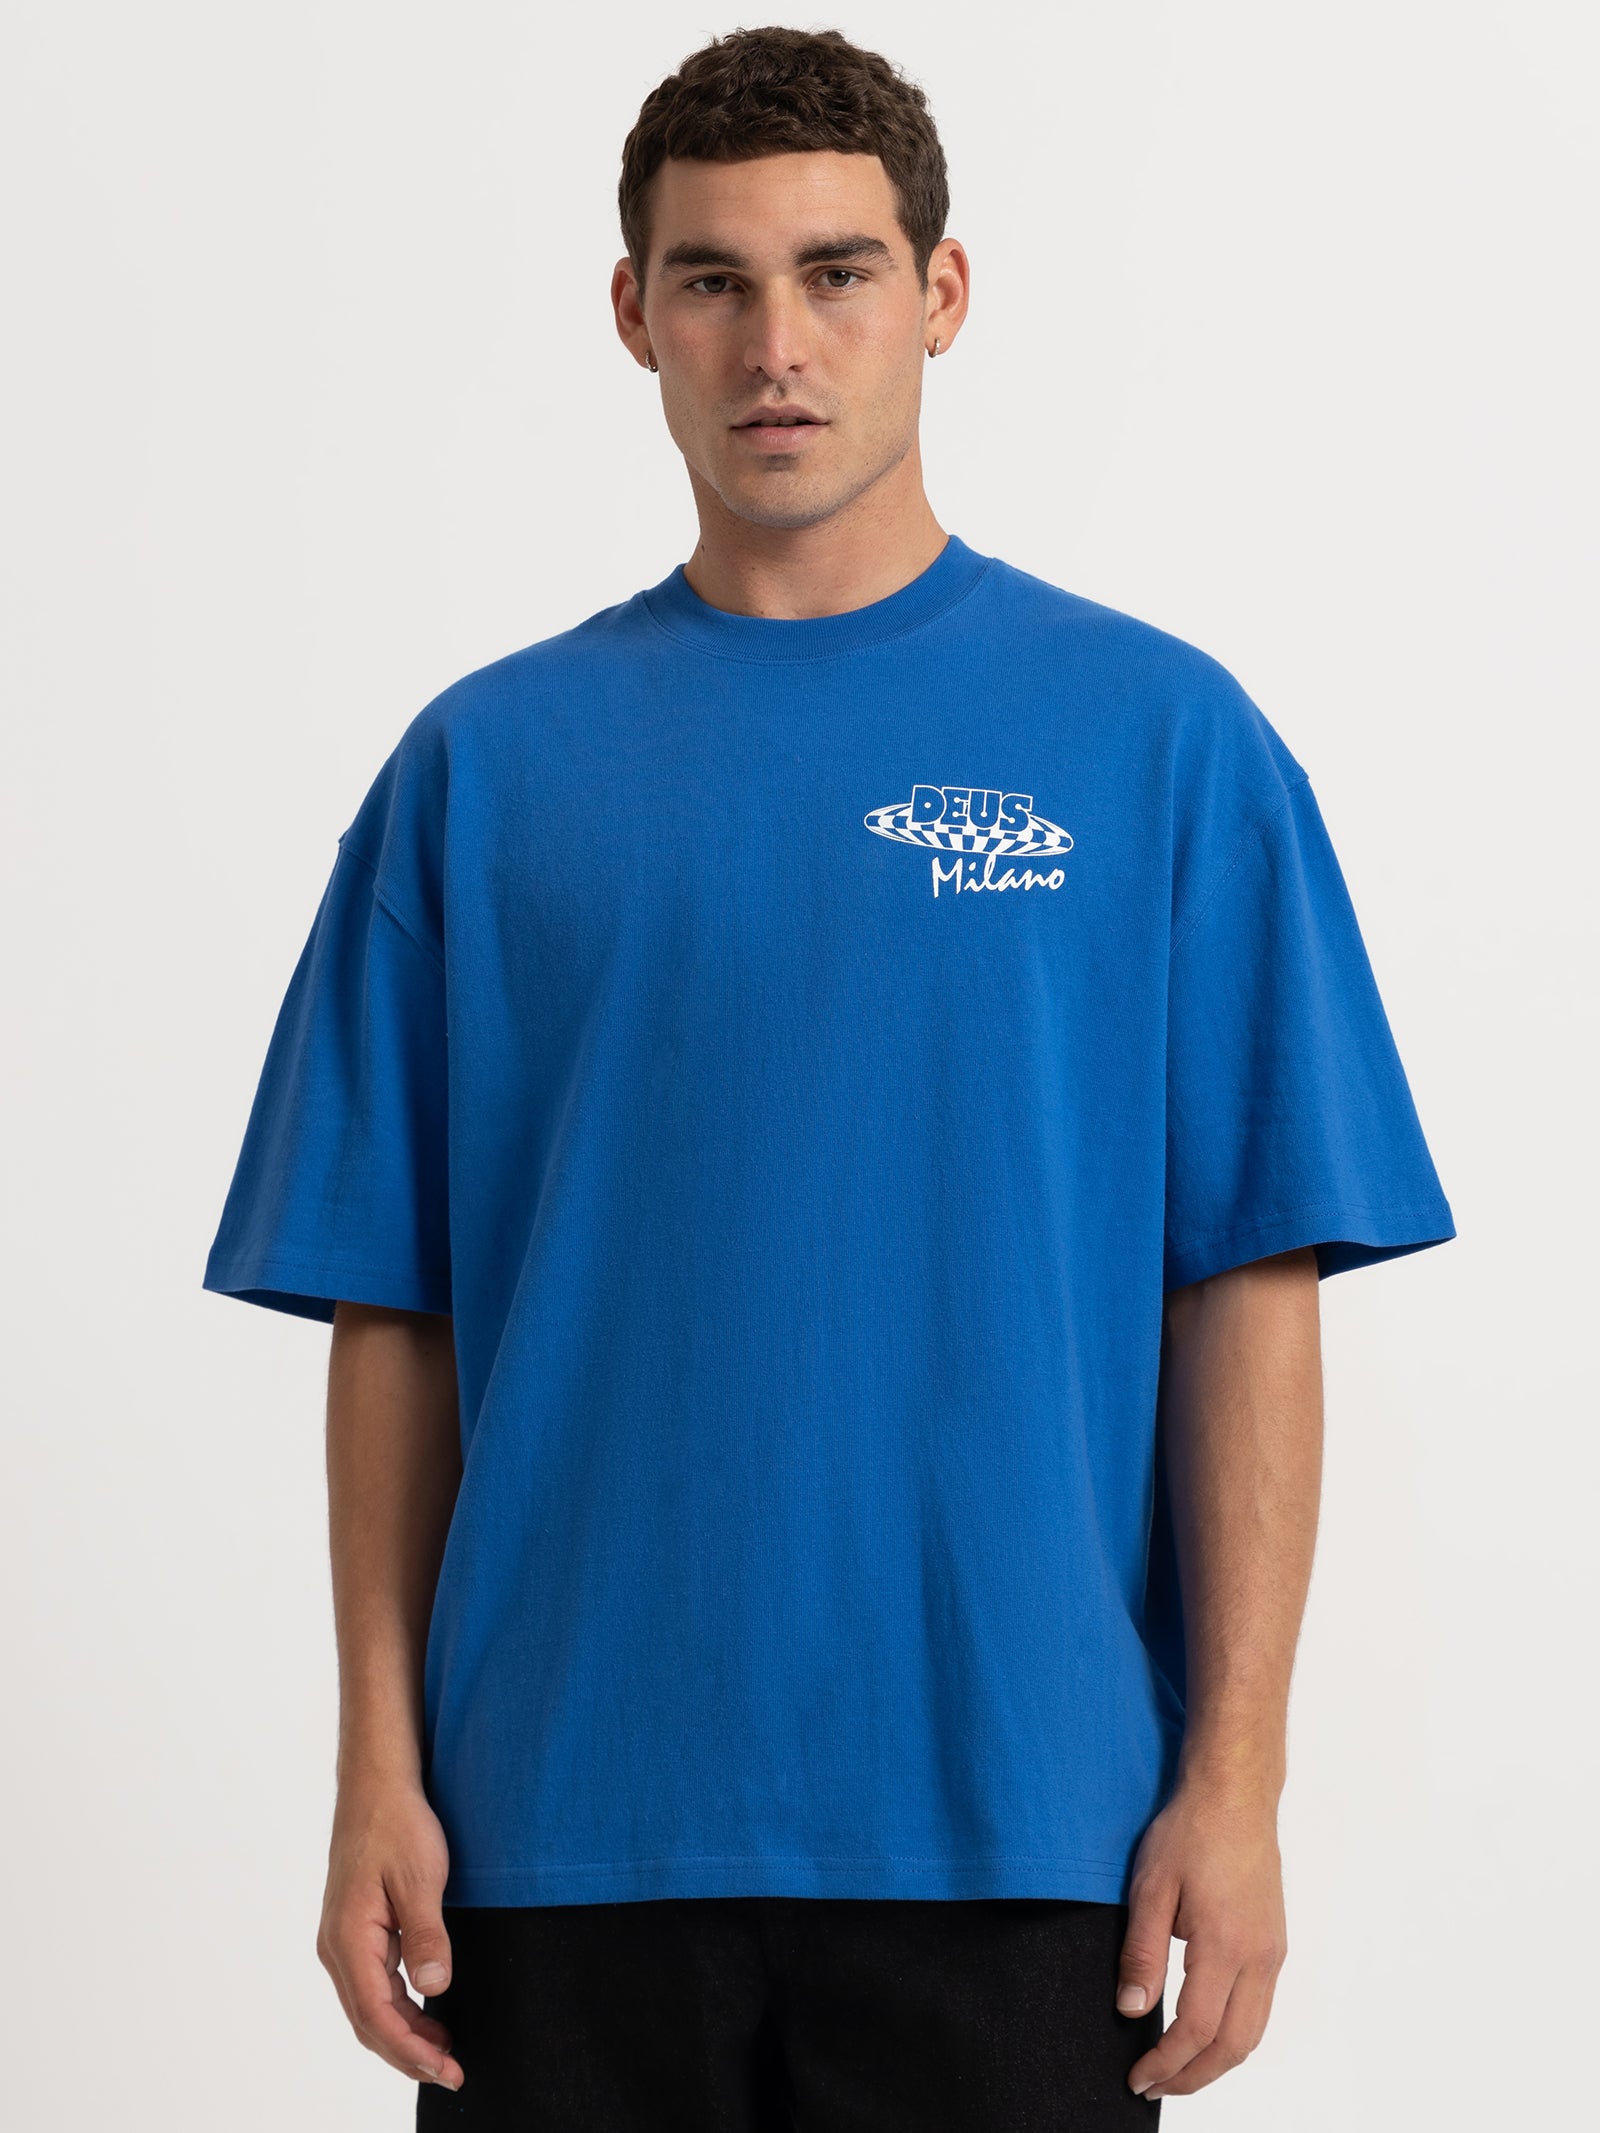 Radicale T-Shirt in Blue